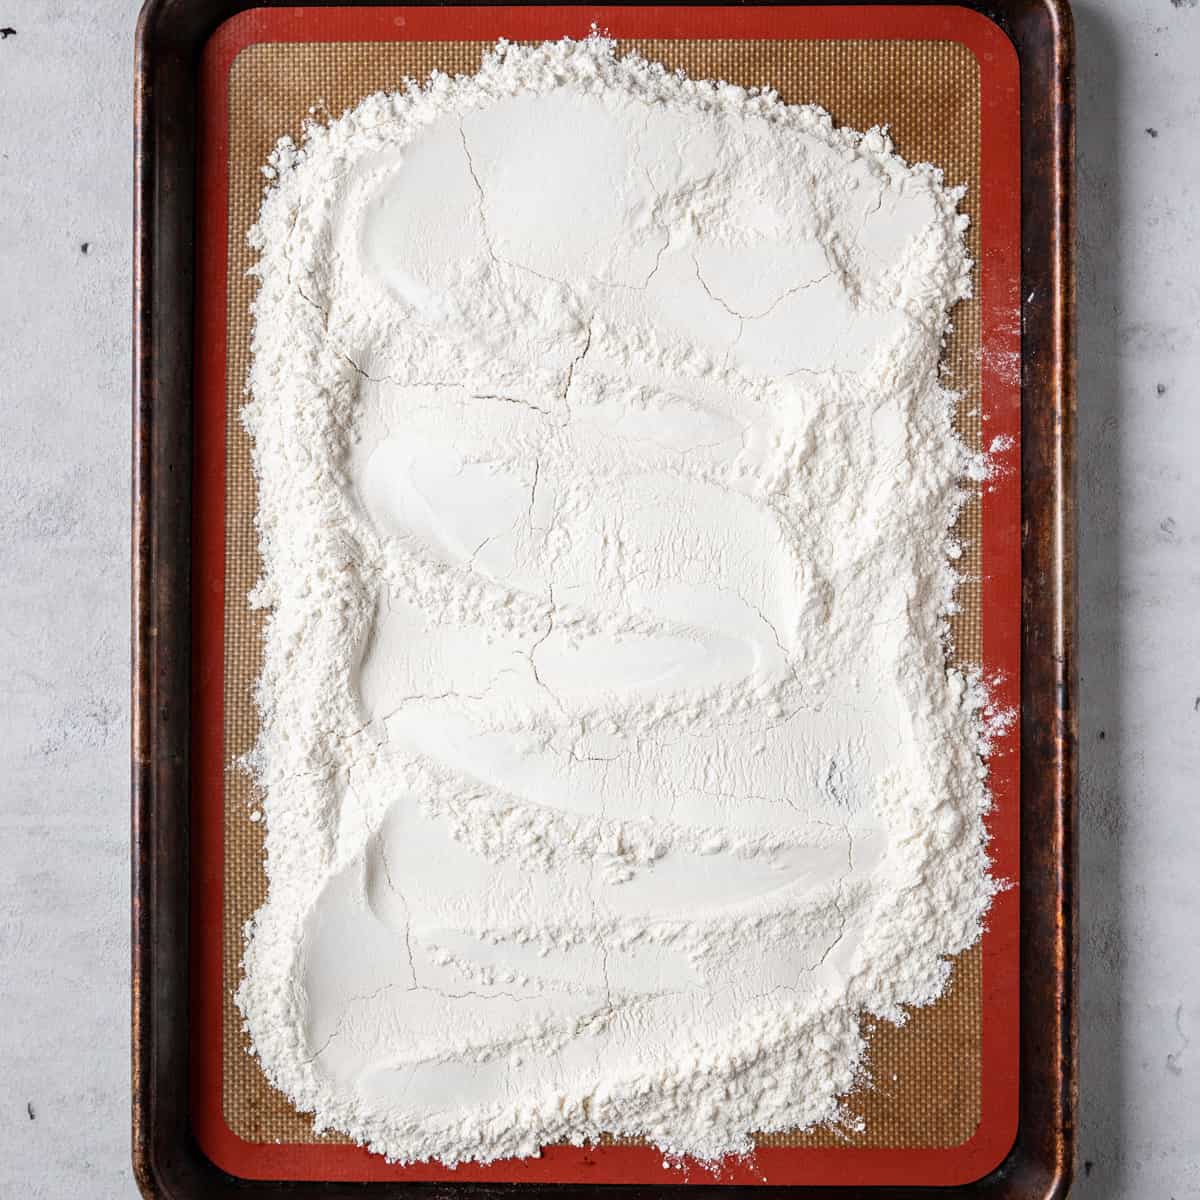 the flour spread out on a baking sheet before being baked.